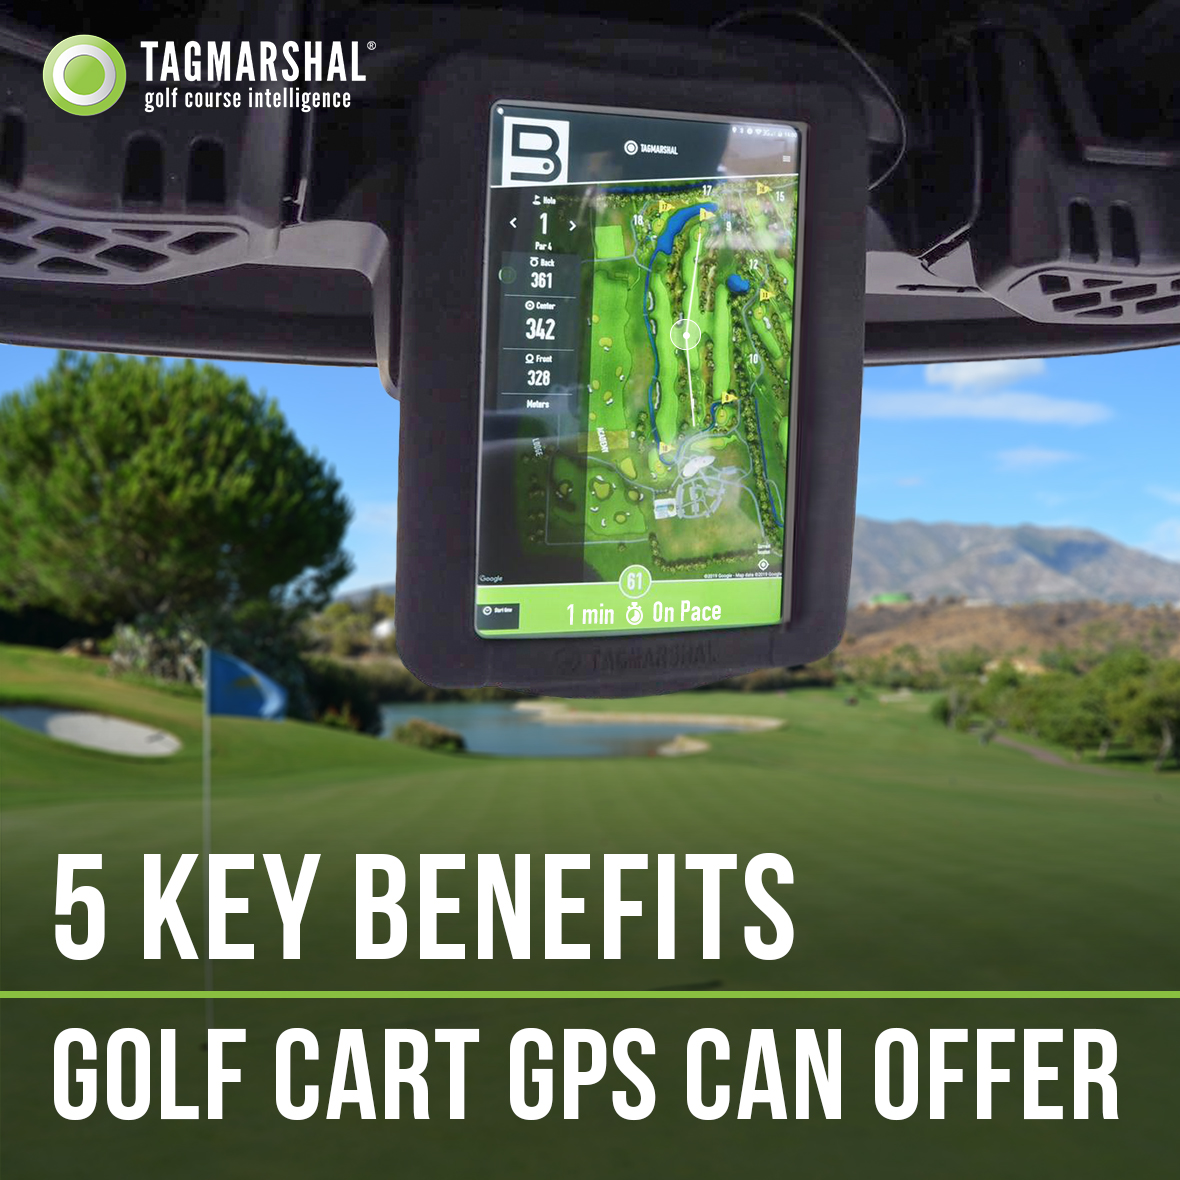 5 key benefits Golf Cart GPS can offer – by Tagmarshal – 2019